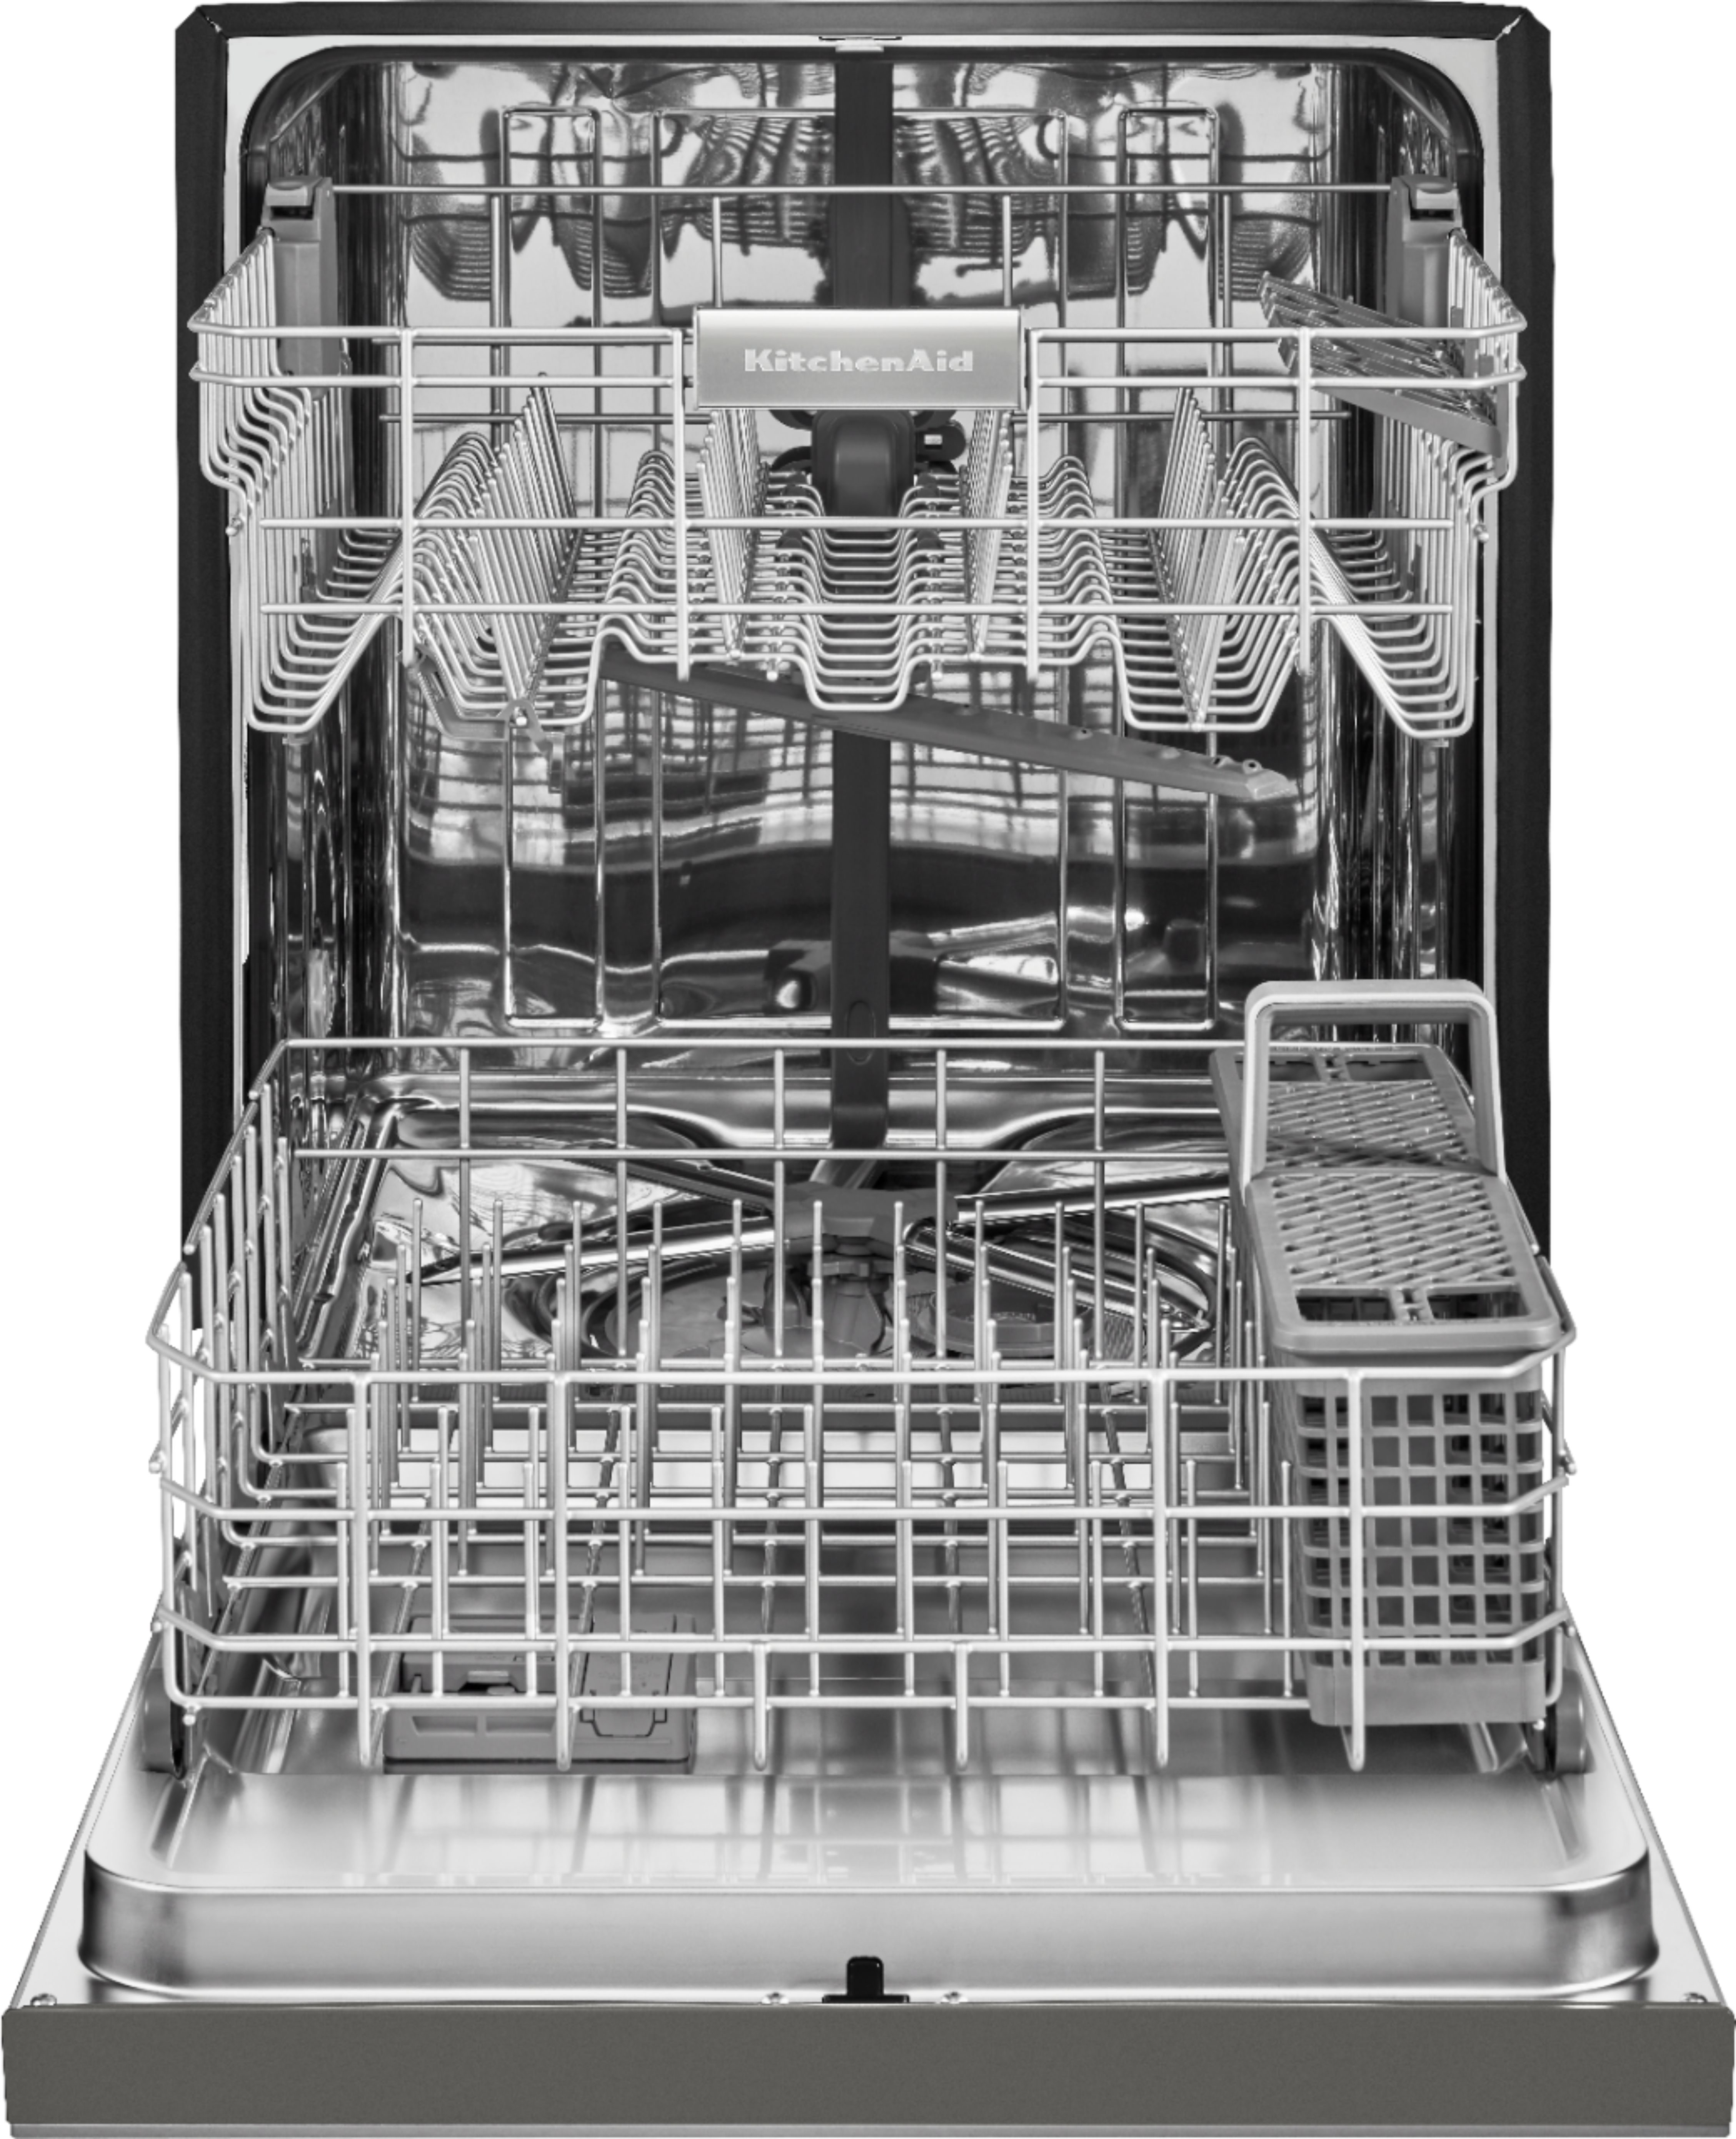 KITCHENAID 24 Front Control Built-In Dishwasher - KDFE104KWH